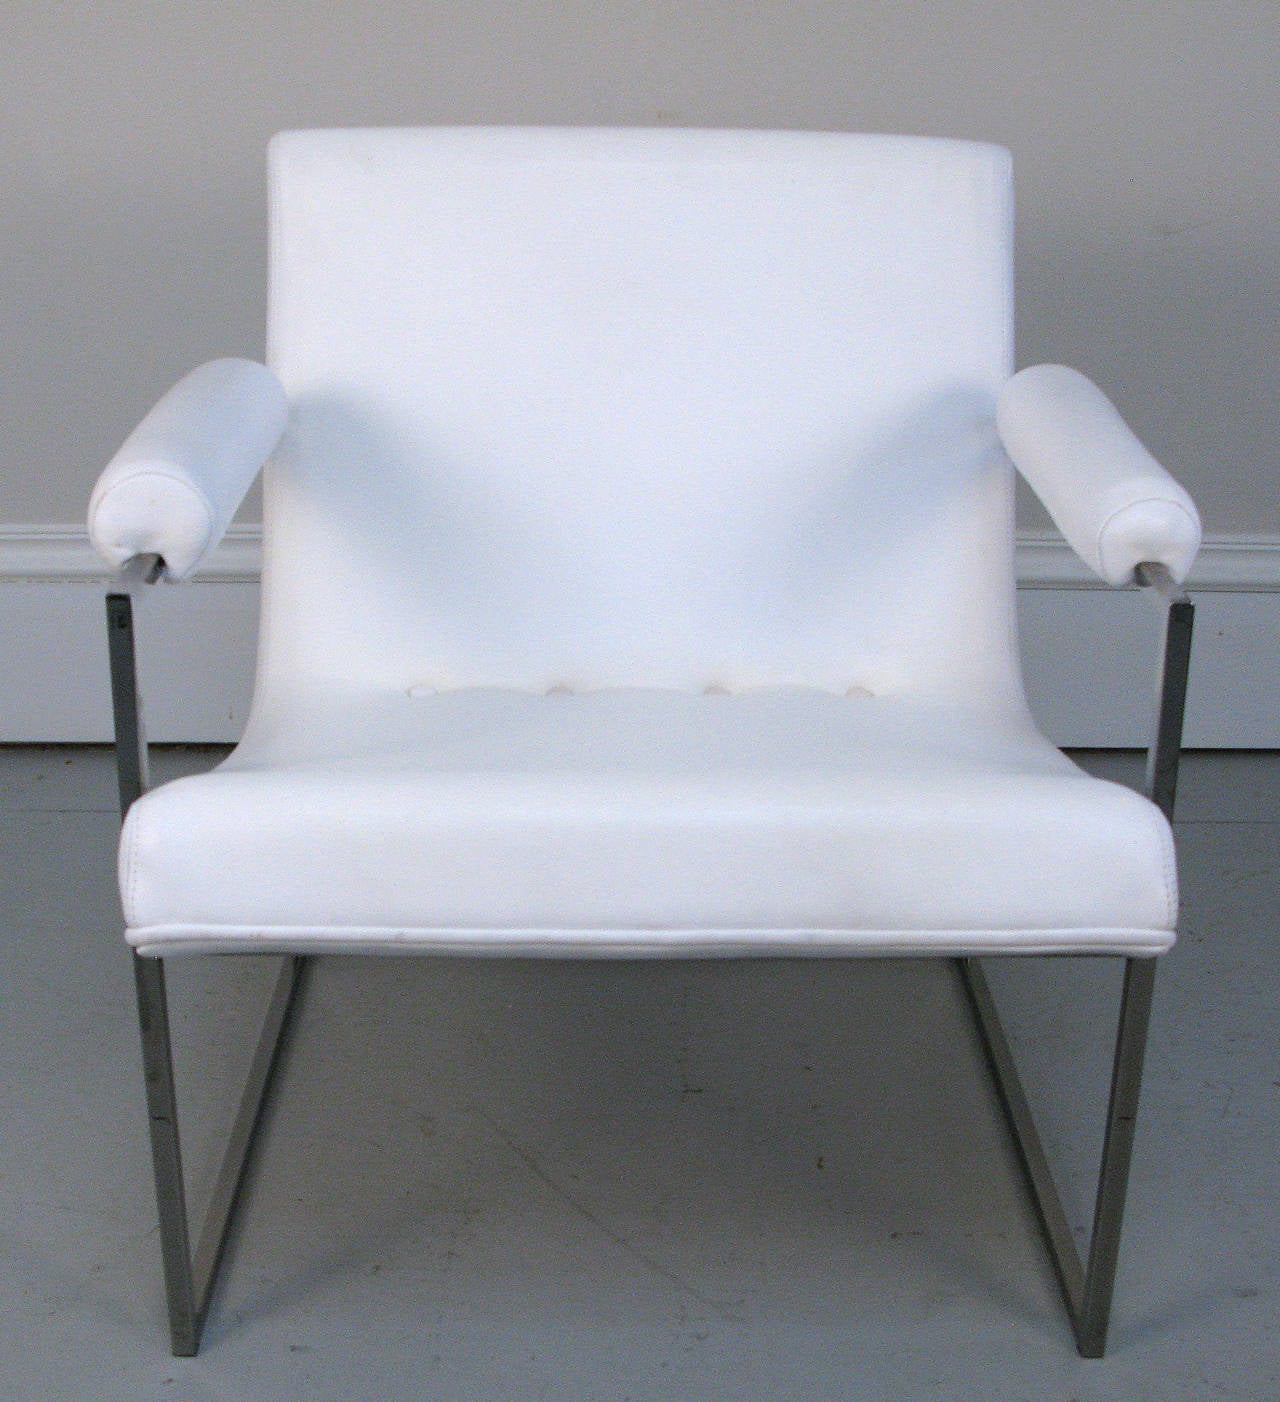 A very good looking chrome frame, comfortable Milo Baughman lounge chair in the original white leather.